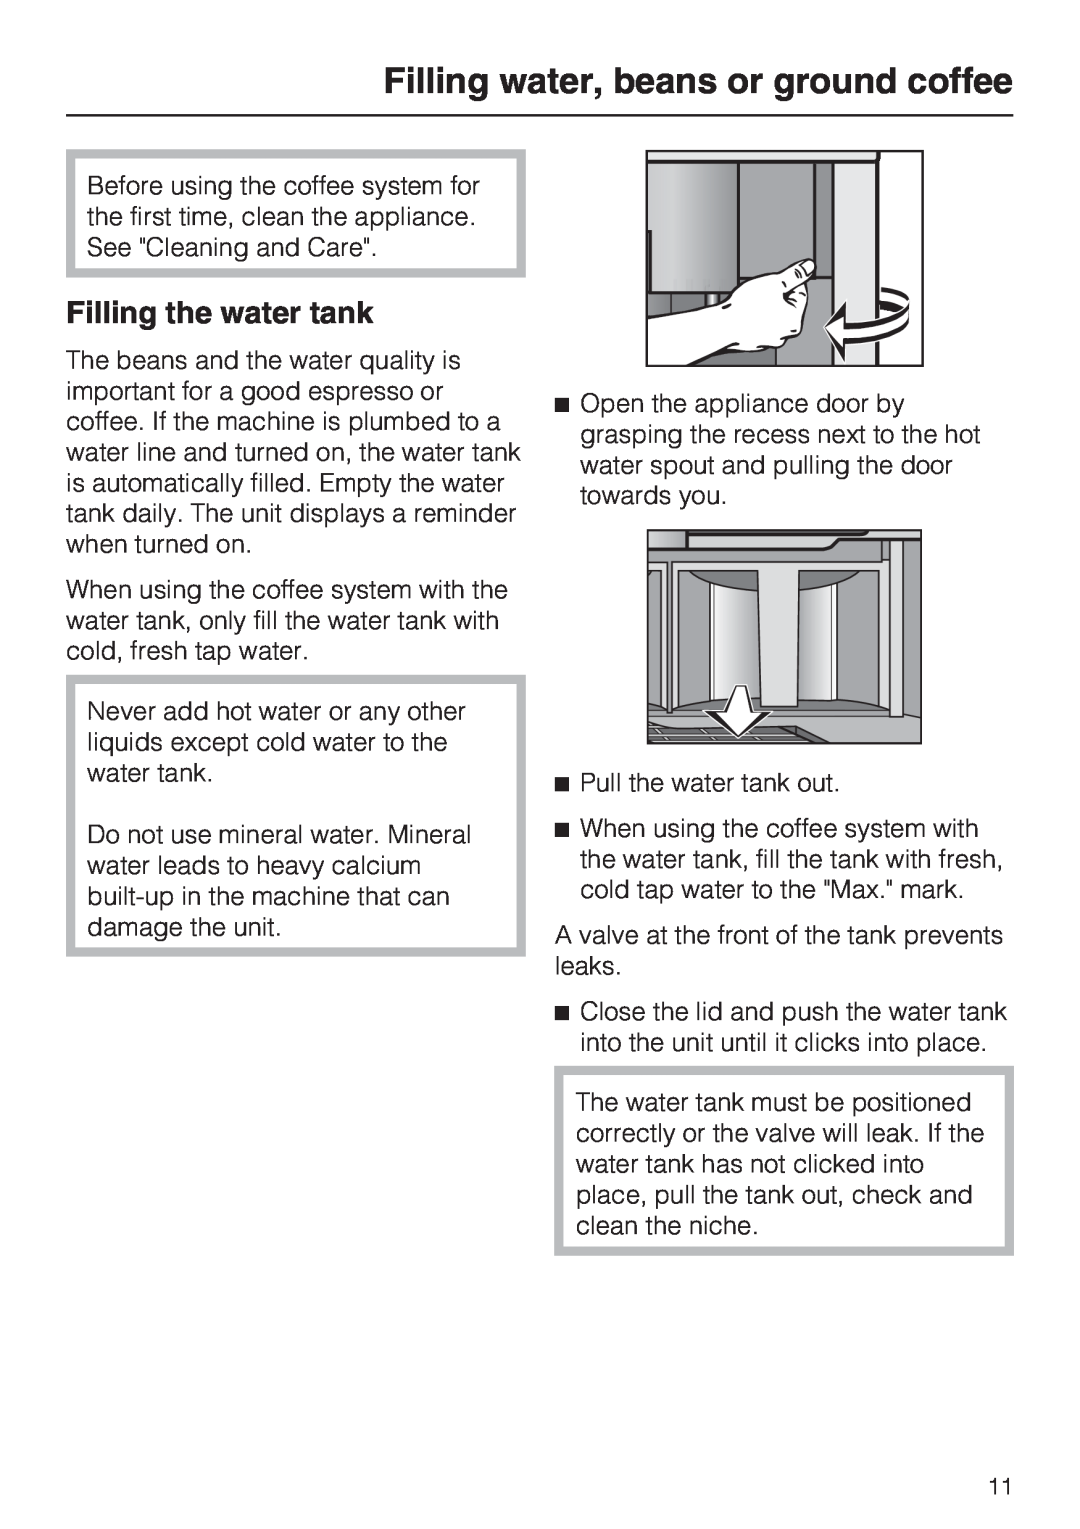 Miele CVA4075 installation instructions Filling water, beans or ground coffee, Filling the water tank 